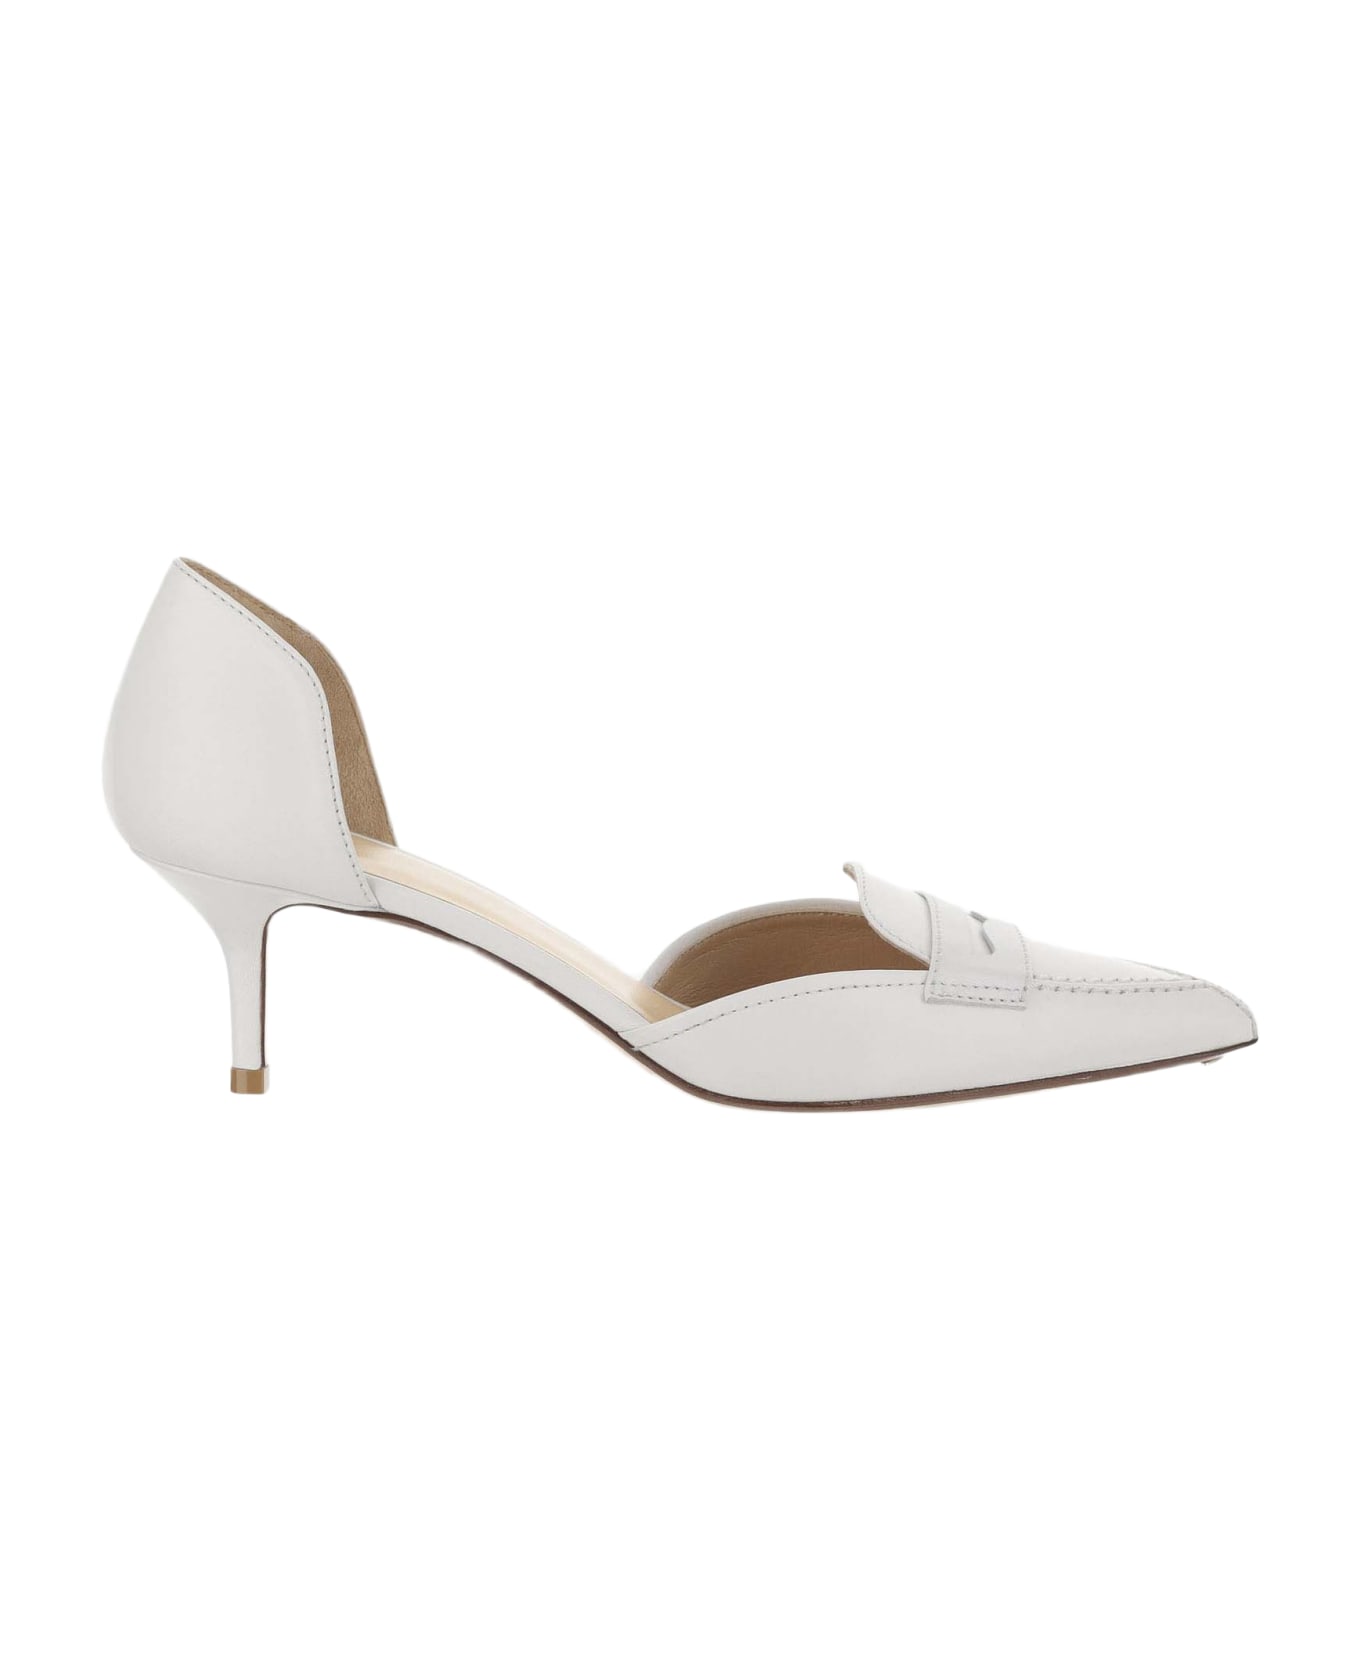 Francesco Russo Leather D'orsay Pumps - White ハイヒール